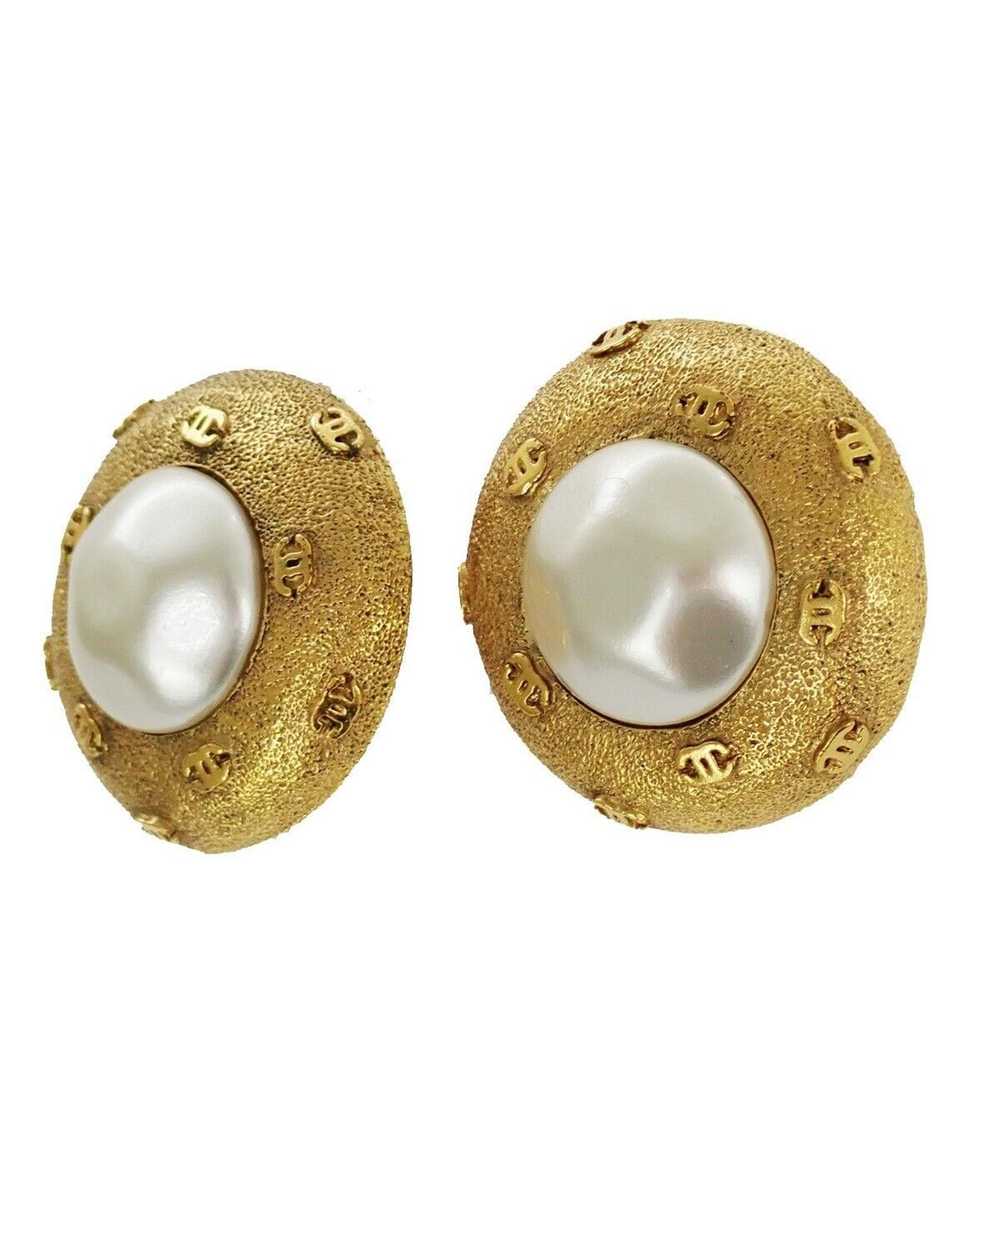 Chanel Coco Mark Button Earrings - image 2